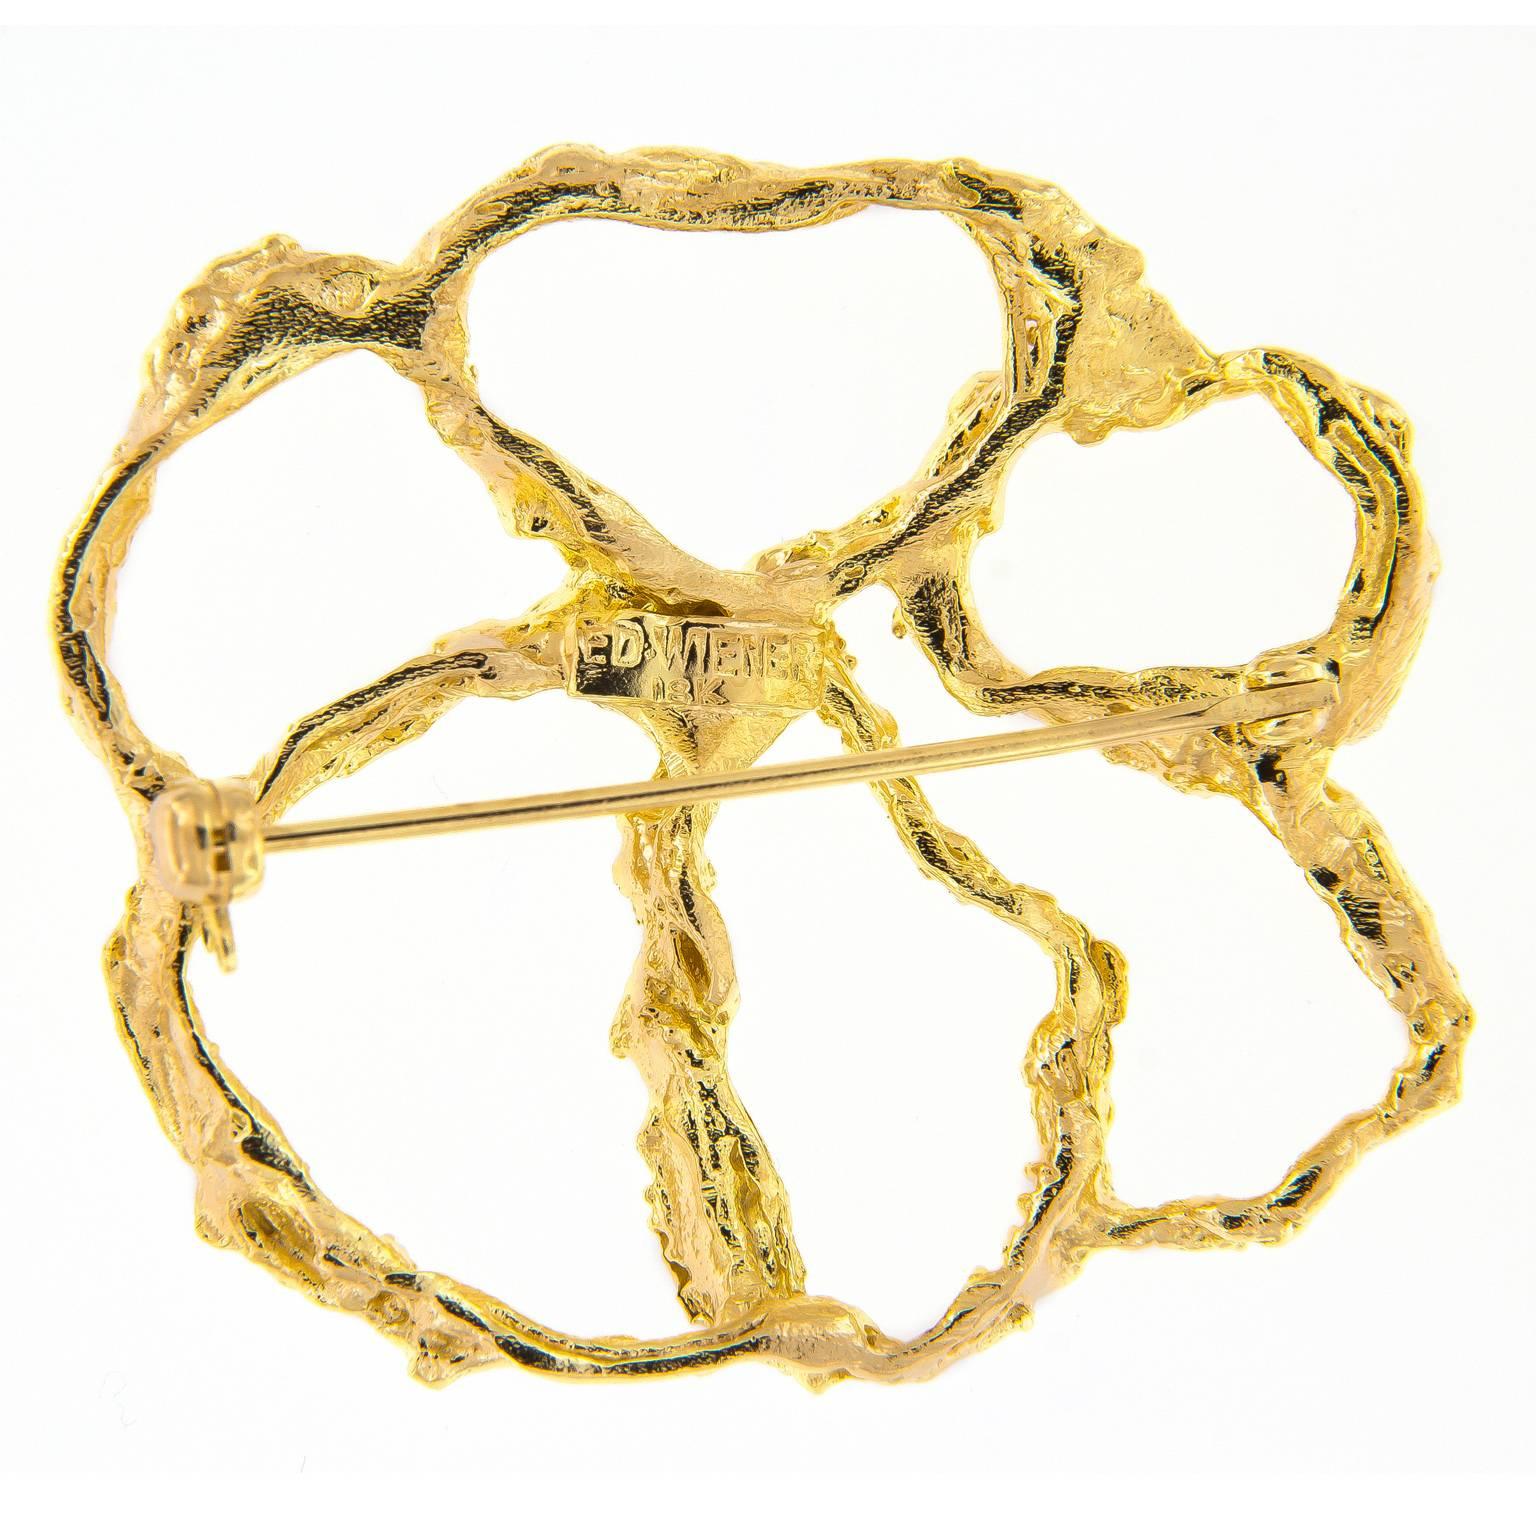 18k yellow gold organic design brooch by American Modernist jeweler Ed Wiener. Wiener mostly worked in silver and didn’t branch out to working in gold until later in his career, moving his work from craft into art. This brooch is truly an